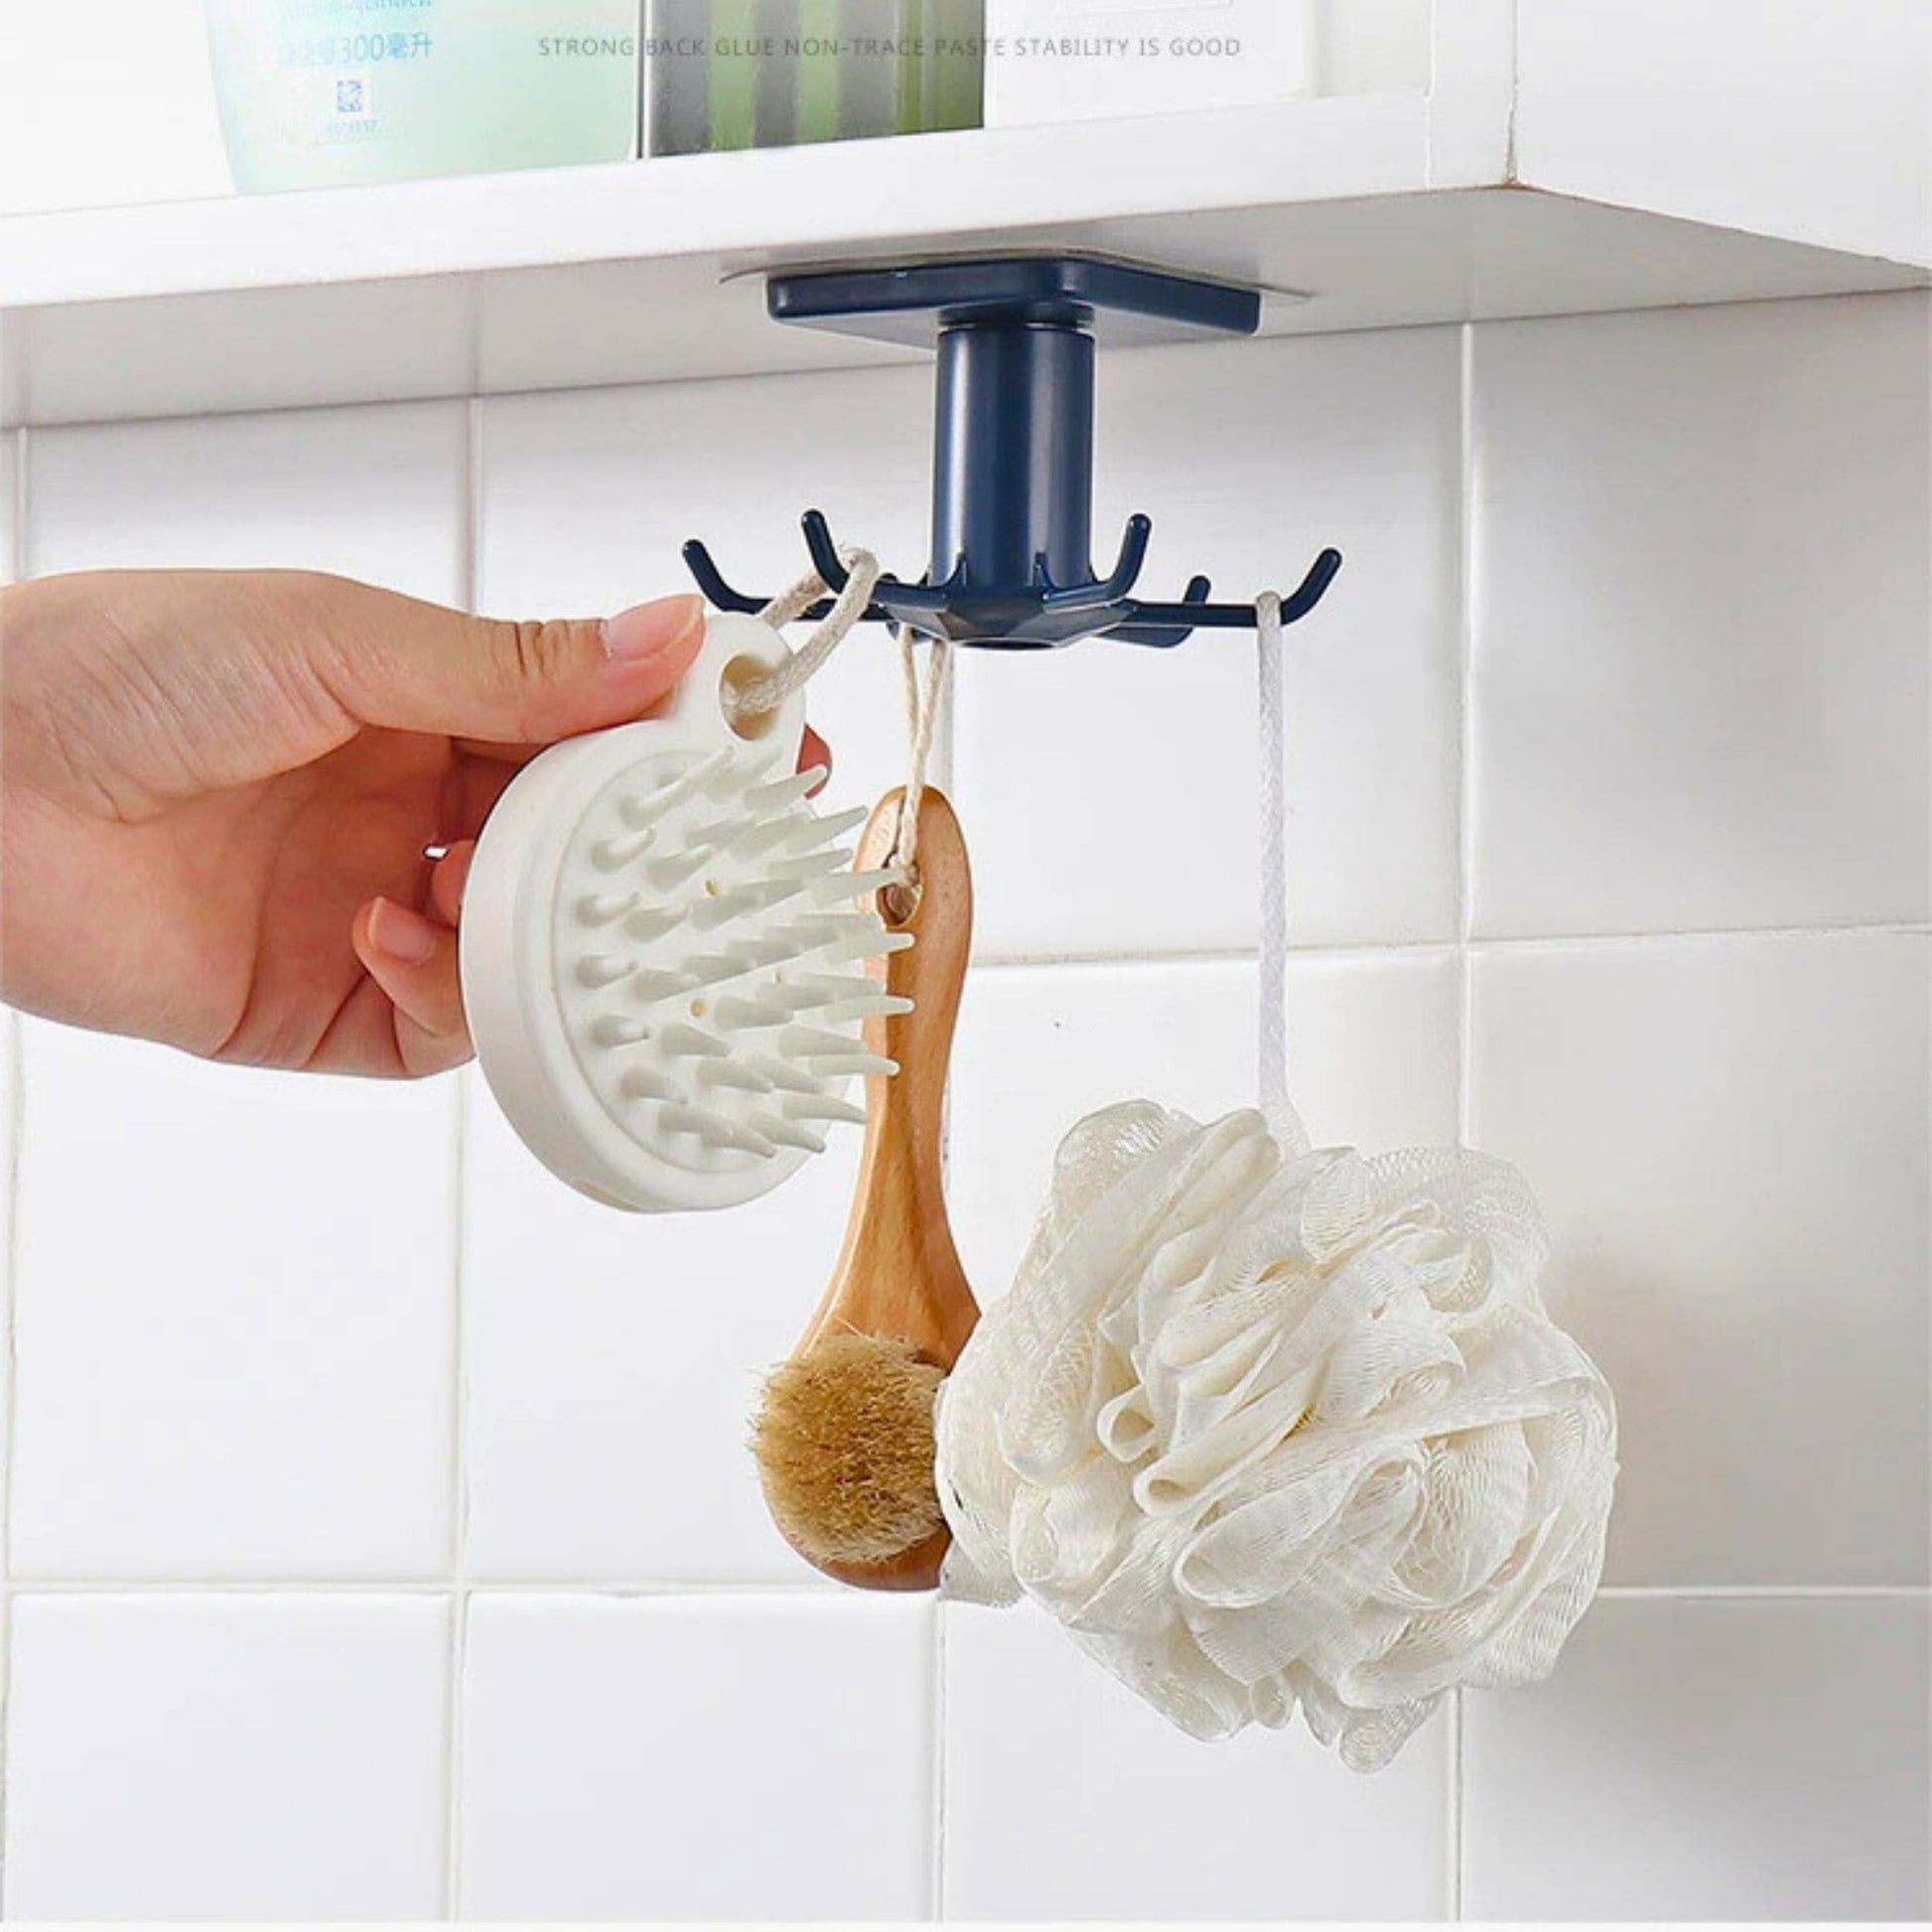 A bathroom organizer hook holding a sponge and a brush, mounted on a white tiled wall